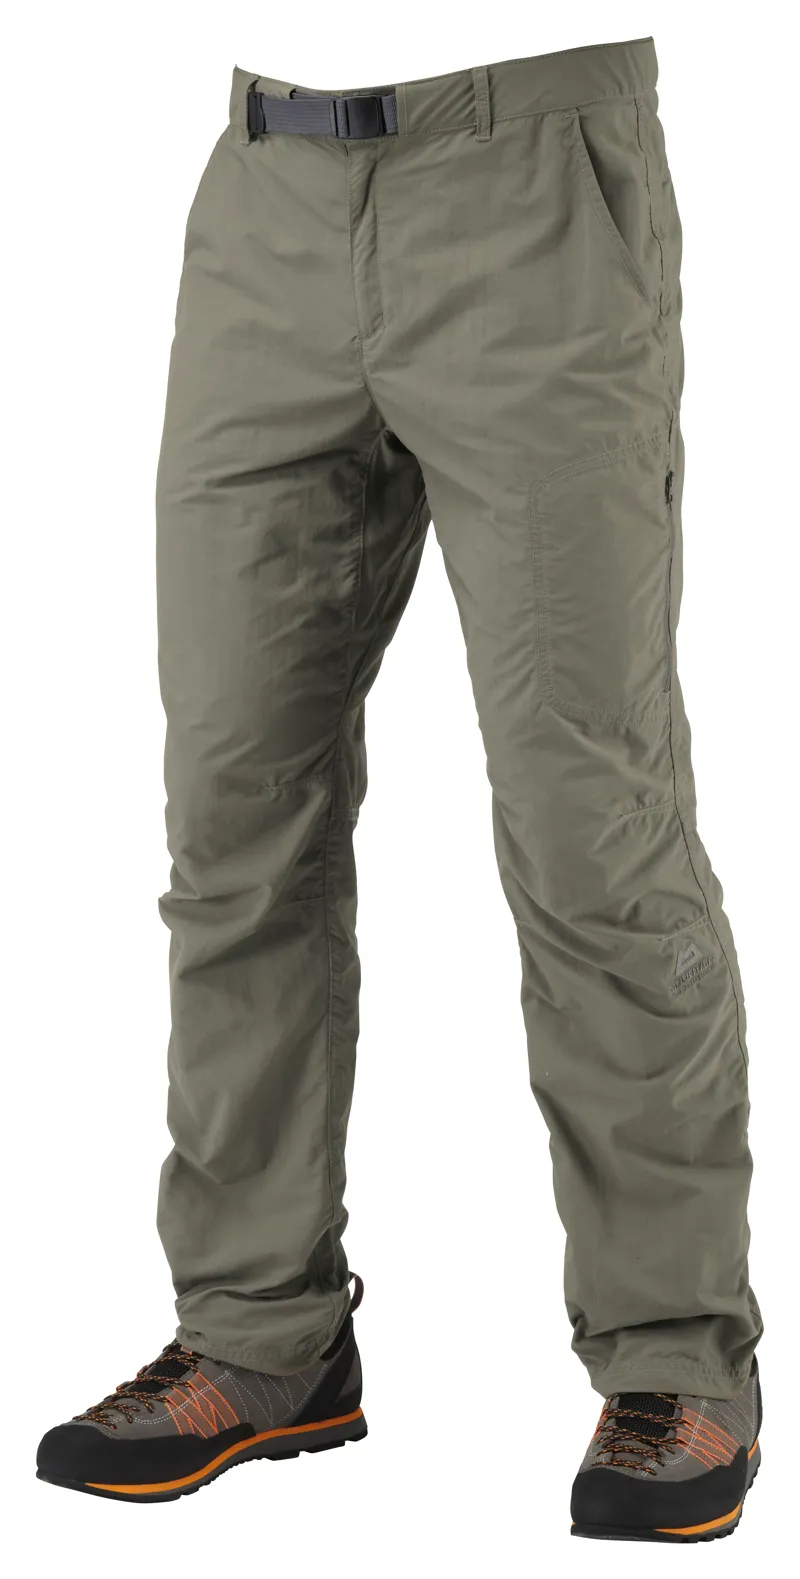 Wrangler Men's Mid-Rise ATG Synthetic Utility Pants at Tractor Supply Co.